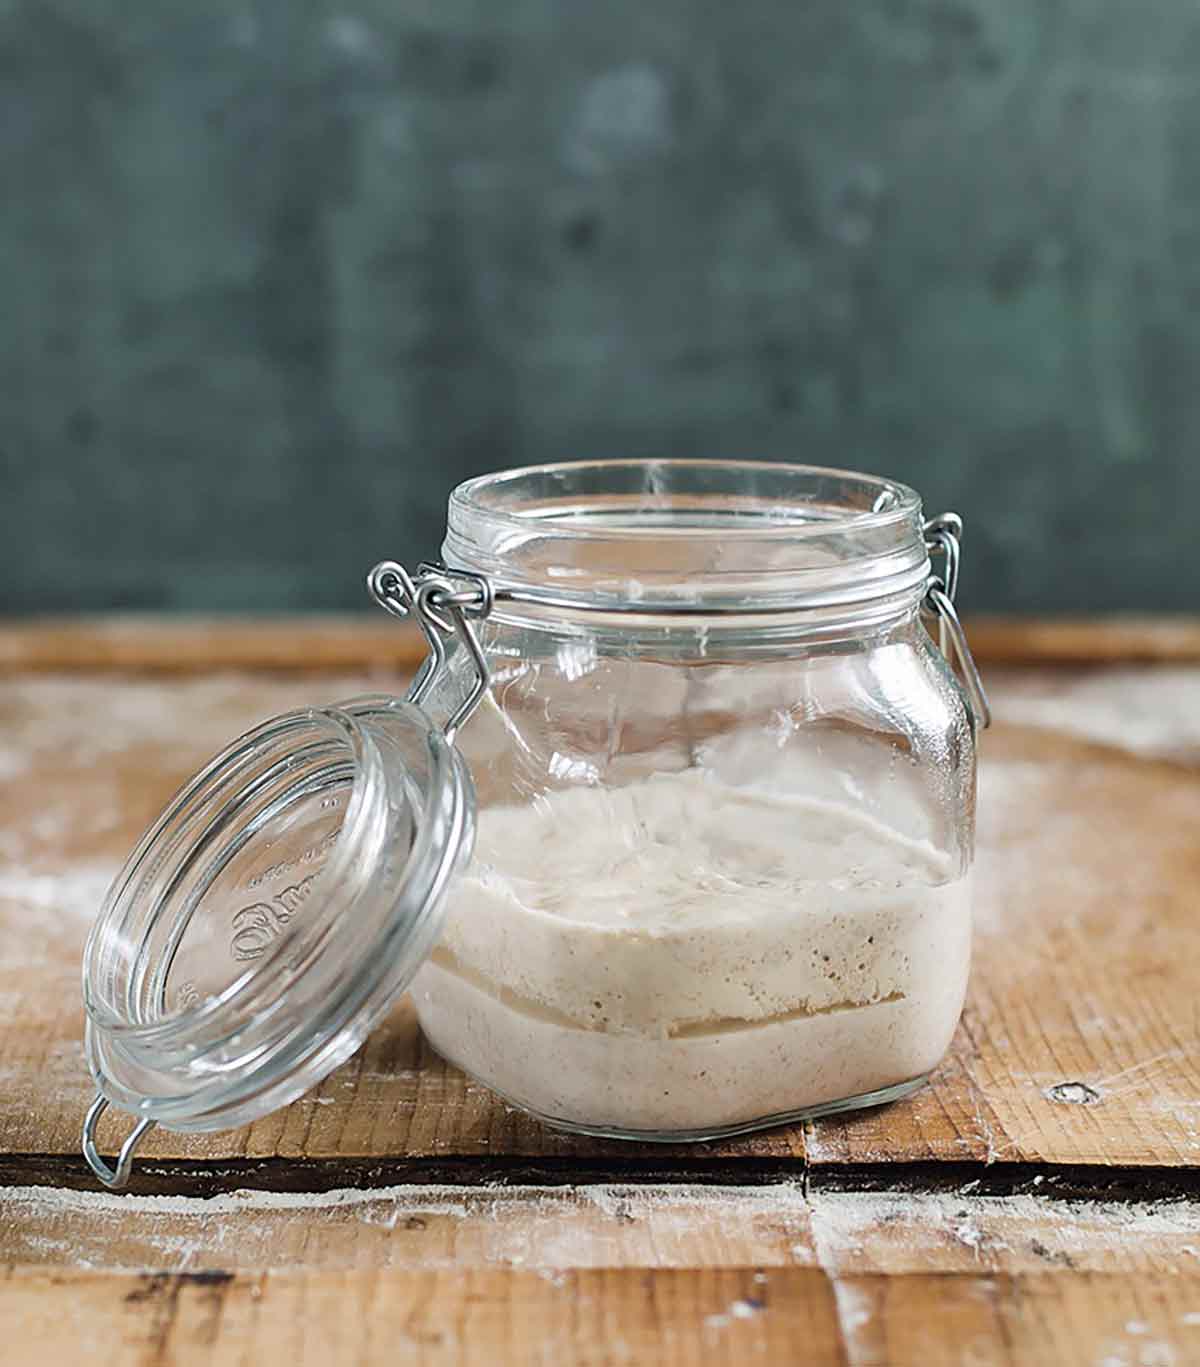 A glass jar with growing starter on a wooden surface as part of an explanation on how to make sourdough starter.